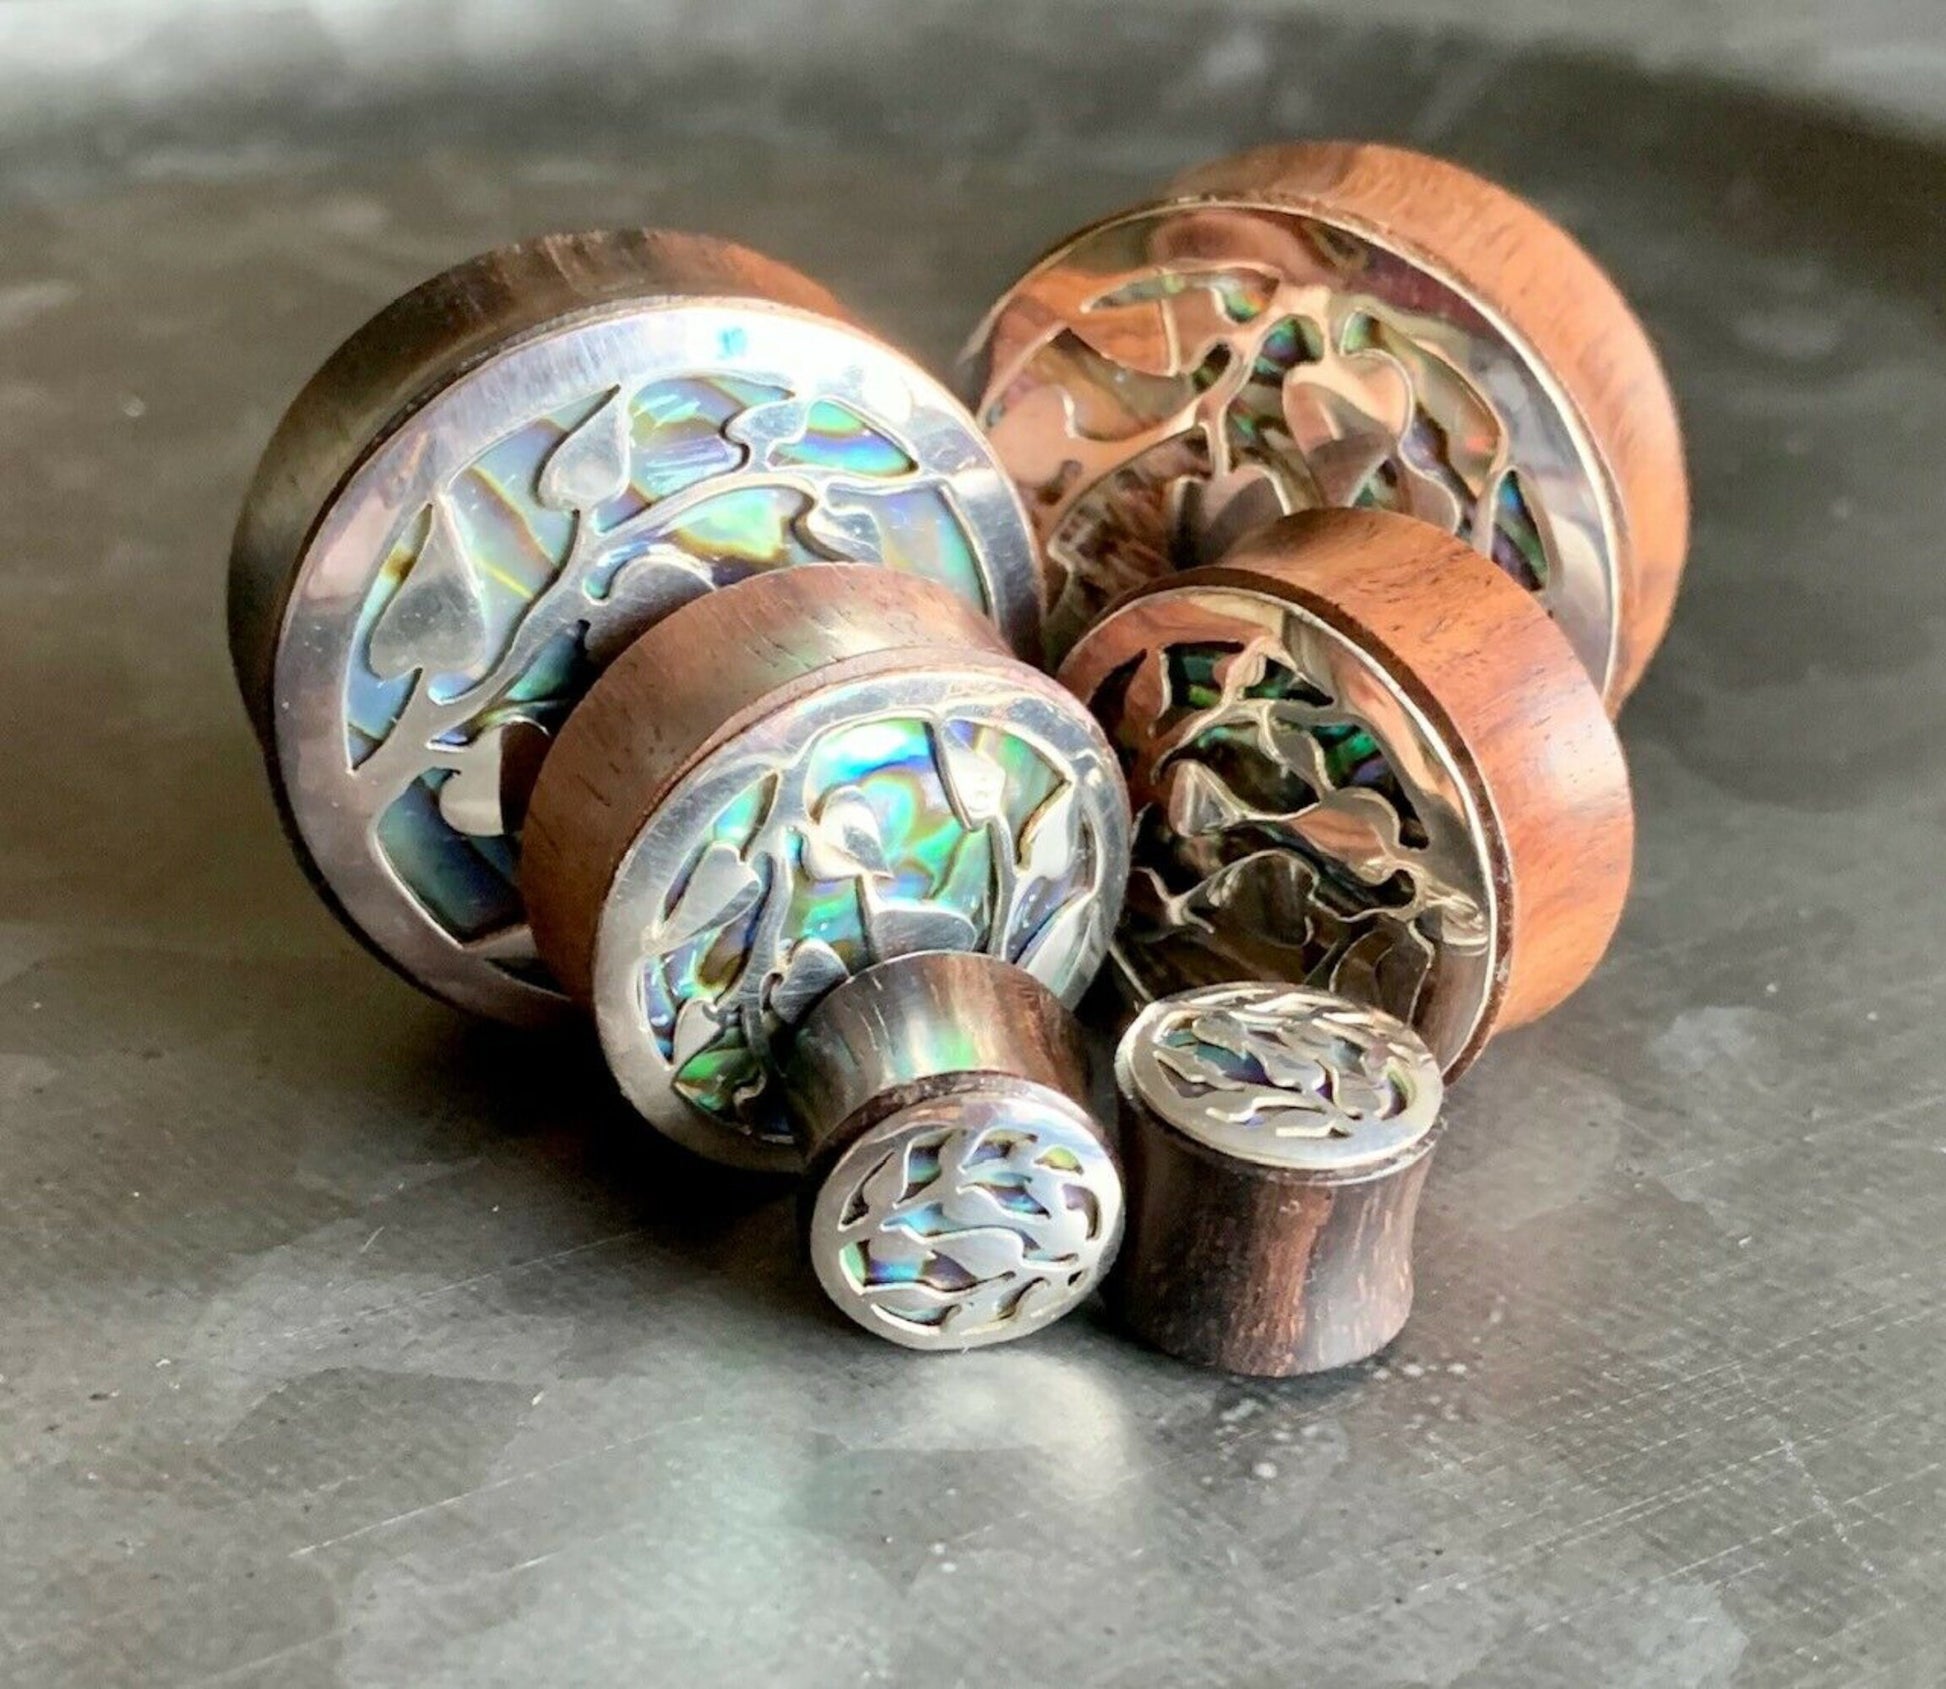 PAIR of Stunning Silver Leaves and Organic Abalone Shell Inlaid Sono Wood Saddle Plugs - Gauges 0000g (12mm) thru 1&3/8" (34mm) available!